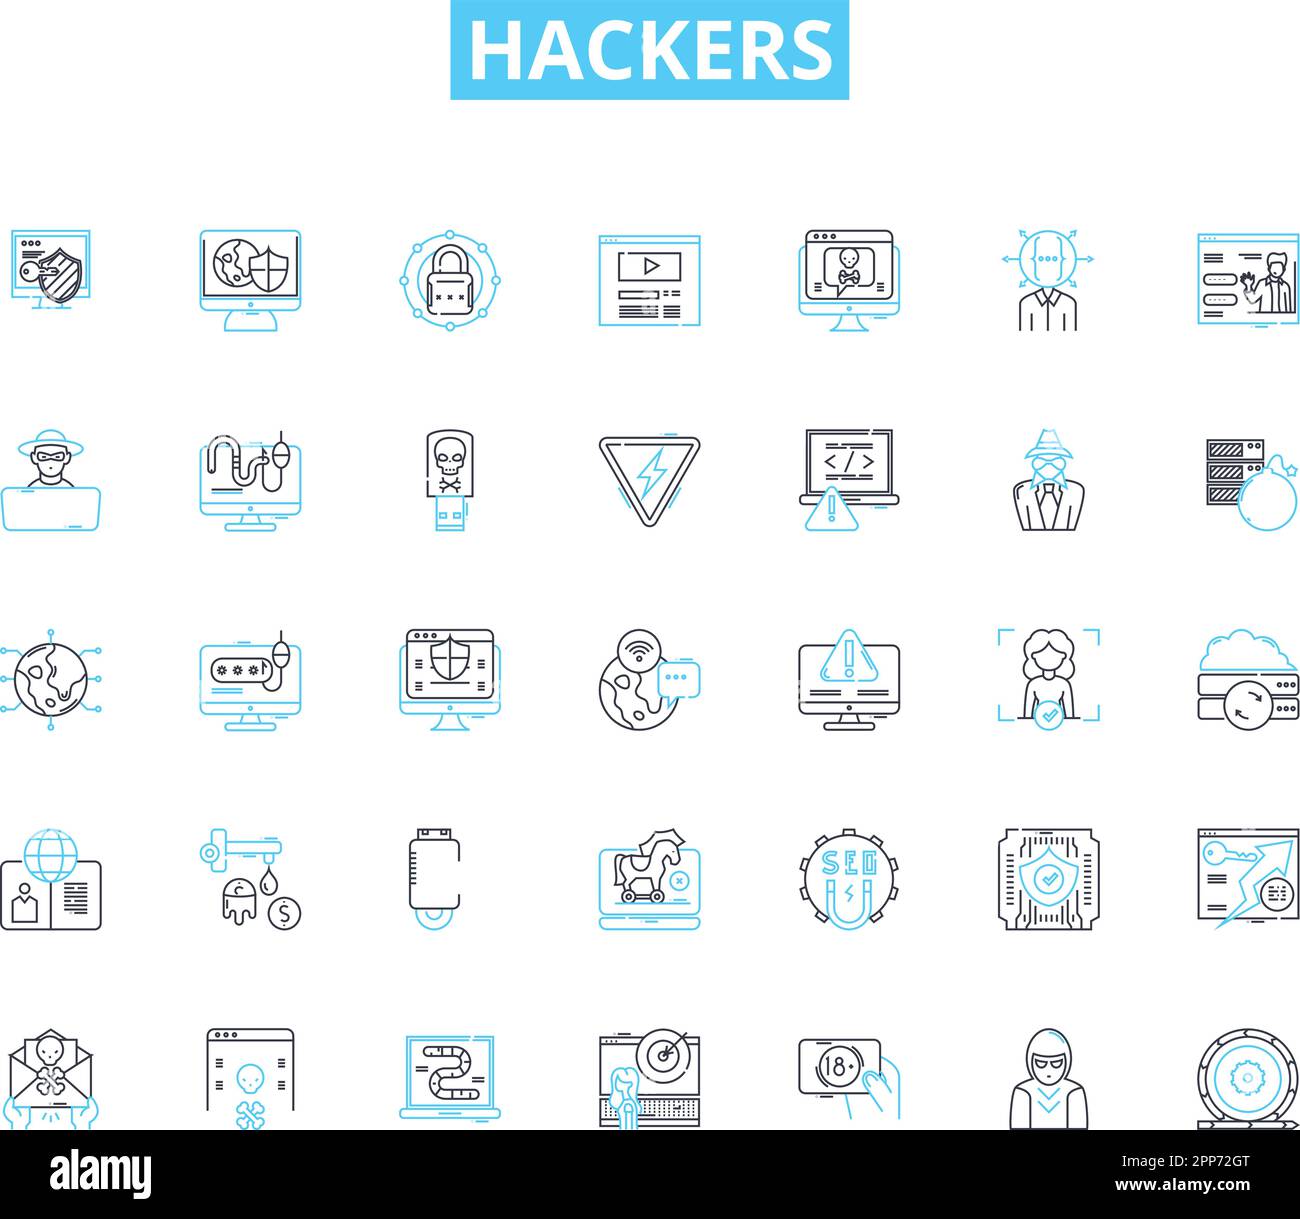 Hackers linear icons set. Cybercriminals, Intruders, Crackers, Hacktivists, Black hats, White hats, Rogue line vector and concept signs. Spies Stock Vector